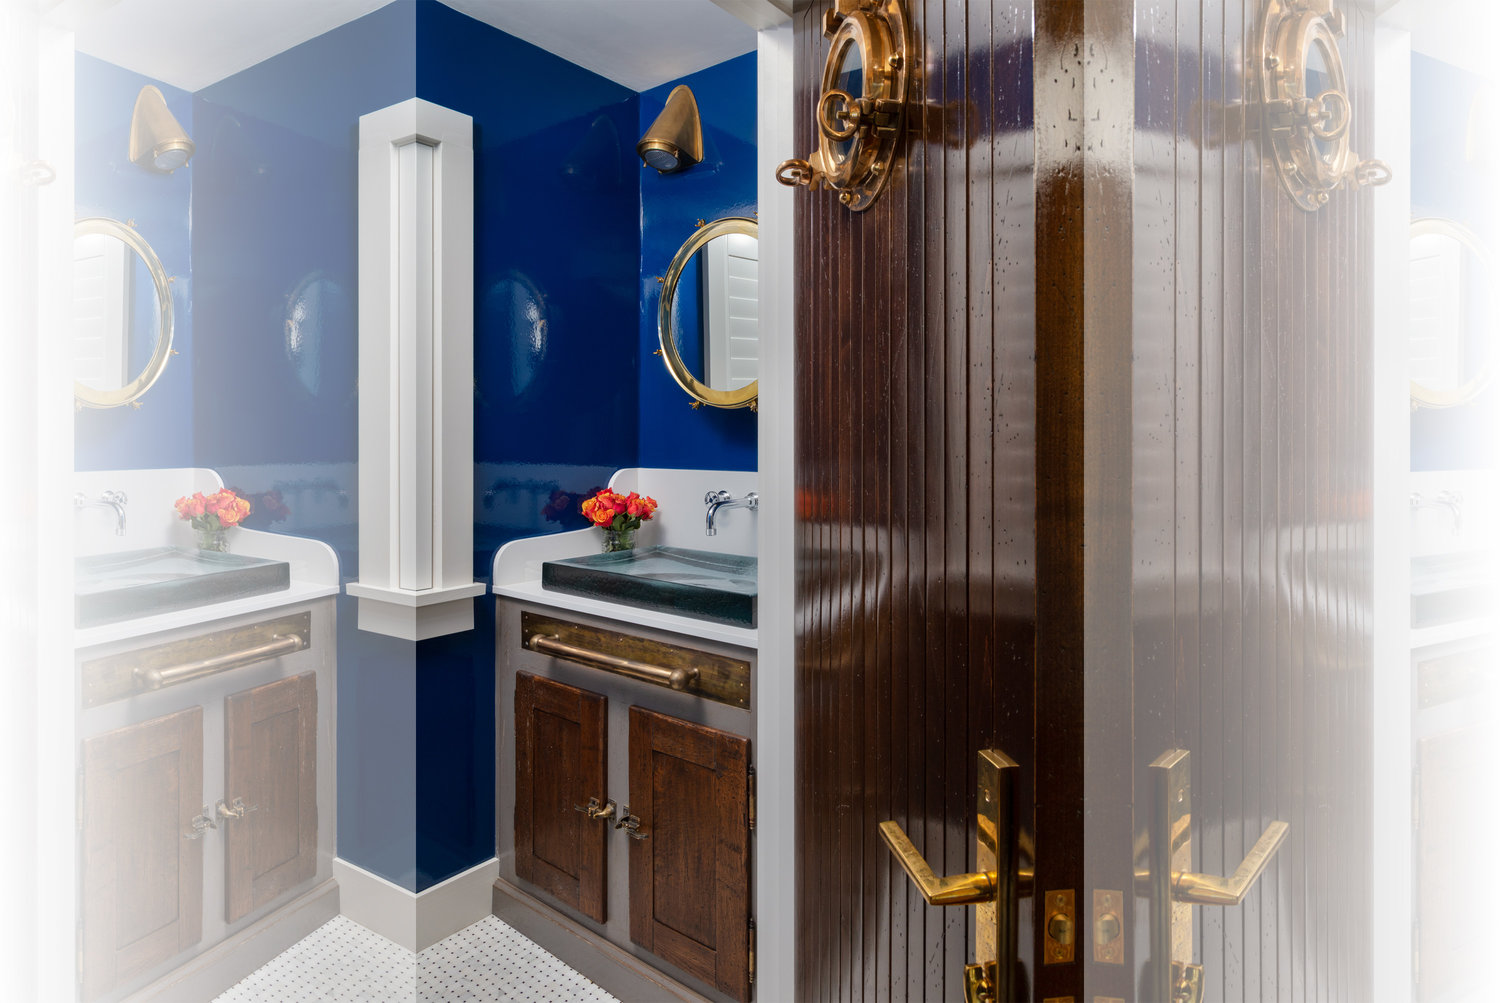 A vintage trunk was retrofitted to become a sink base with a modern blue sea glass Kohler sink atop; vinyl gloss blue wallcovering adds a dimension reminiscent of a fiberglass interior of a ship